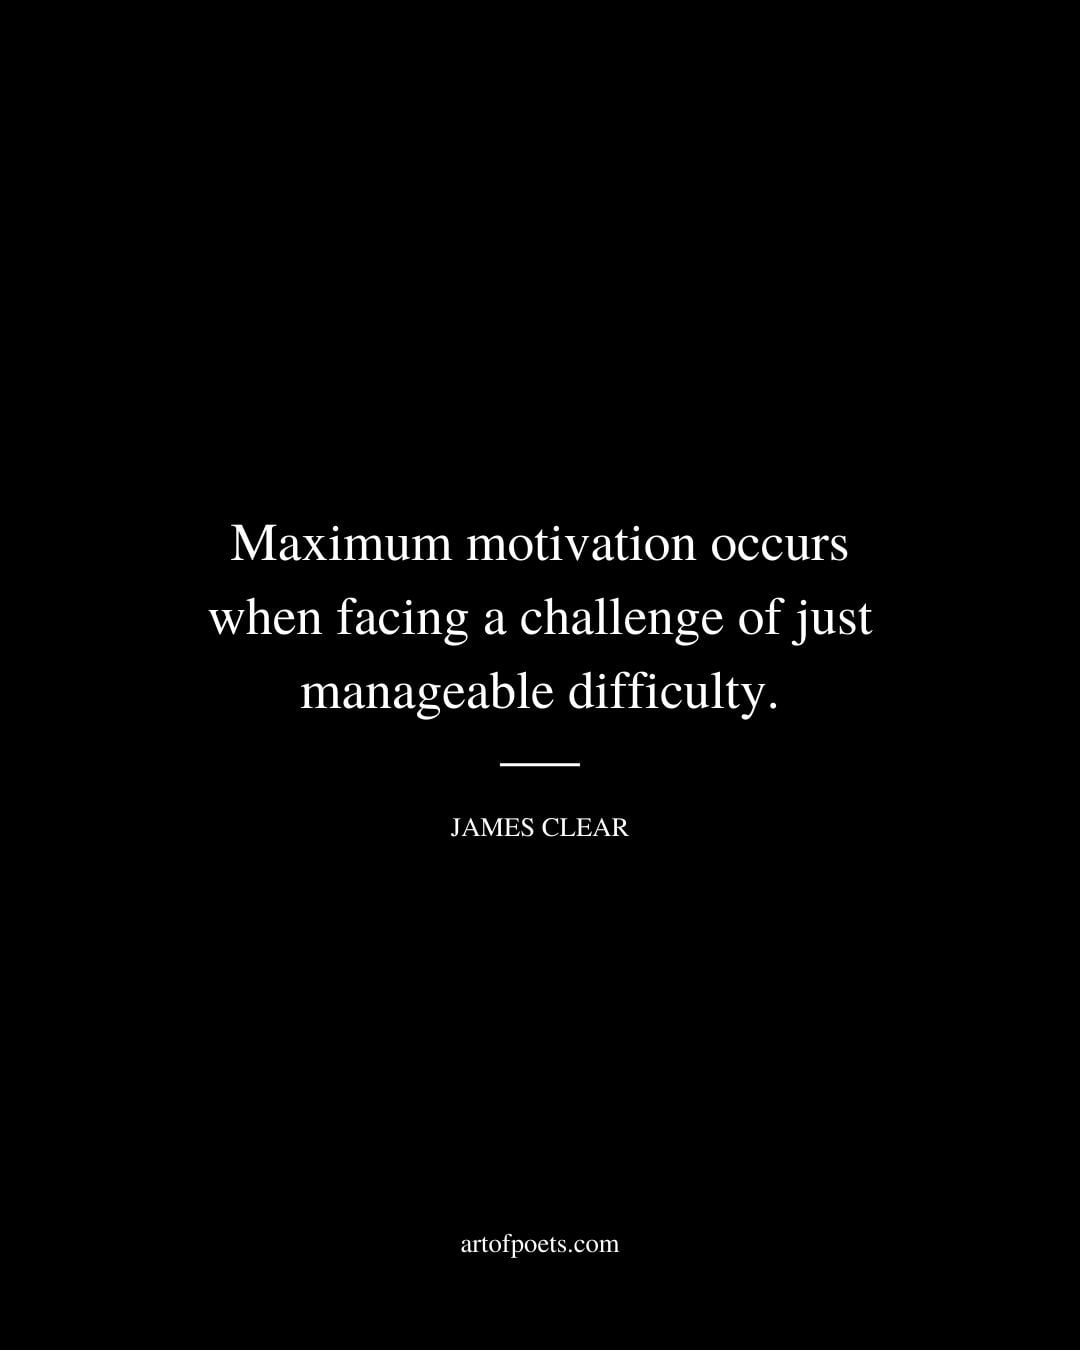 Maximum motivation occurs when facing a challenge of just manageable difficulty